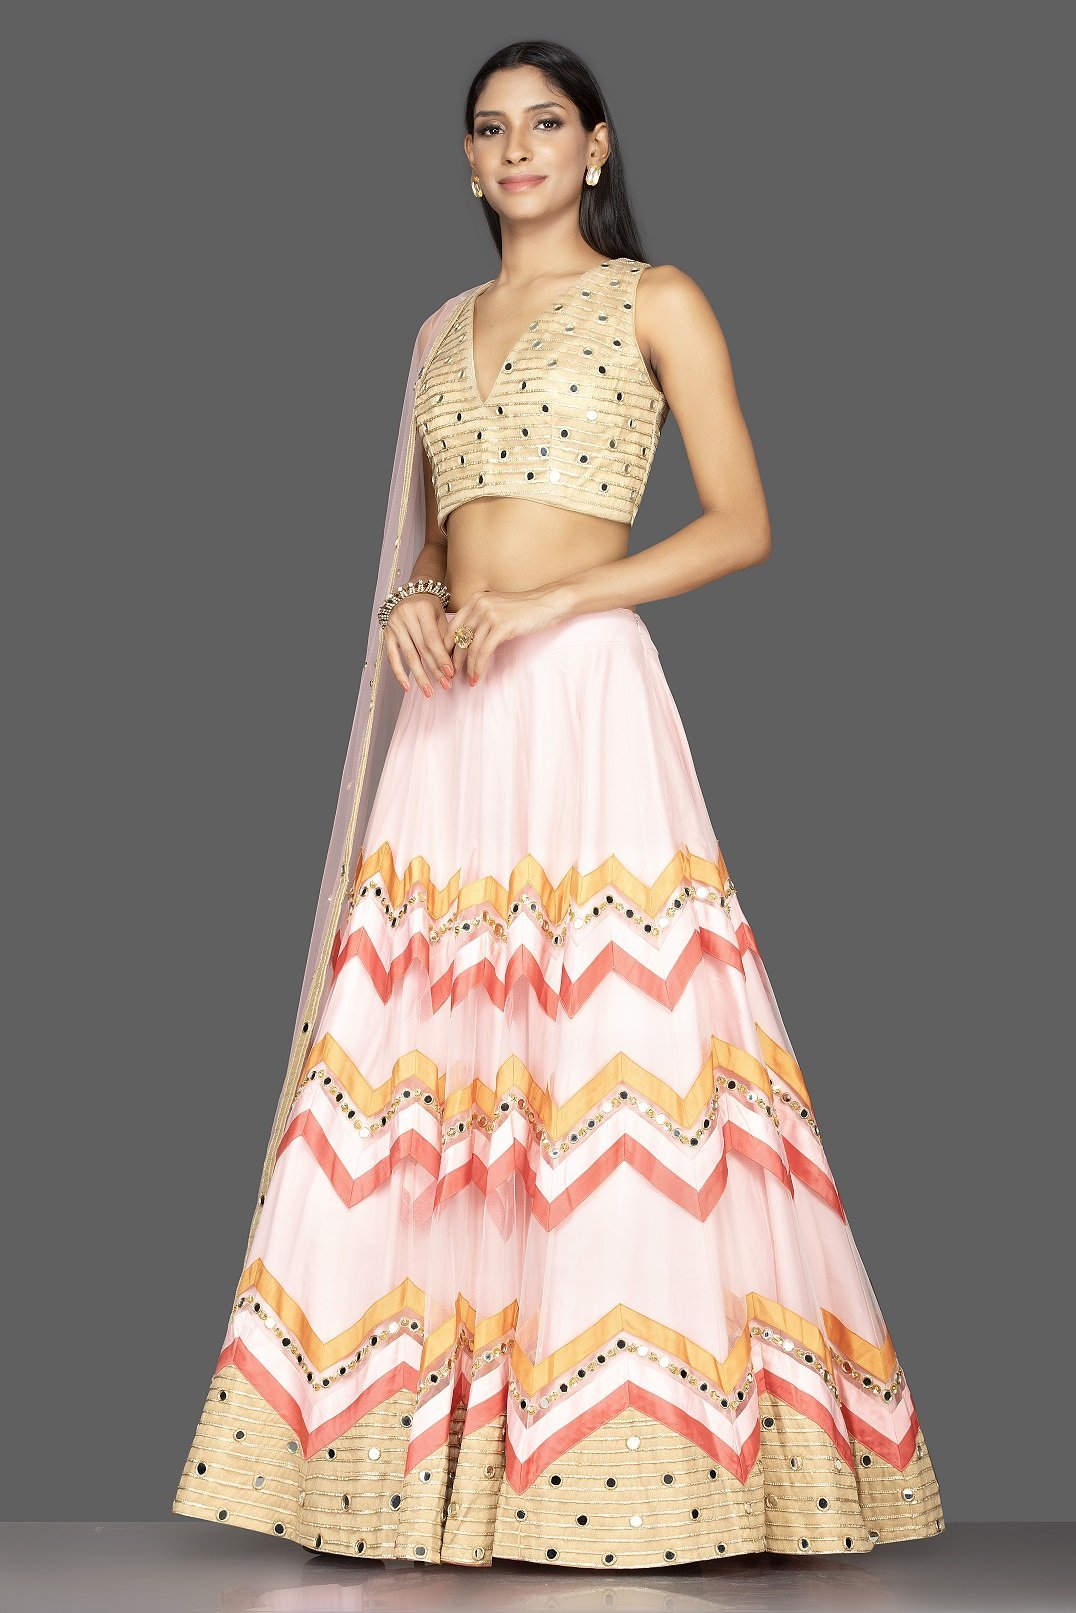 Buy glamorous powder pink chevron design mirror work lehenga online in USA with matching dupatta. Spread ethnic elegance on weddings and special occasions in splendid designer lehengas, Indowestern dresses crafted with exquisite Indian craftsmanship from Pure Elegance Indian fashion store in USA.-side